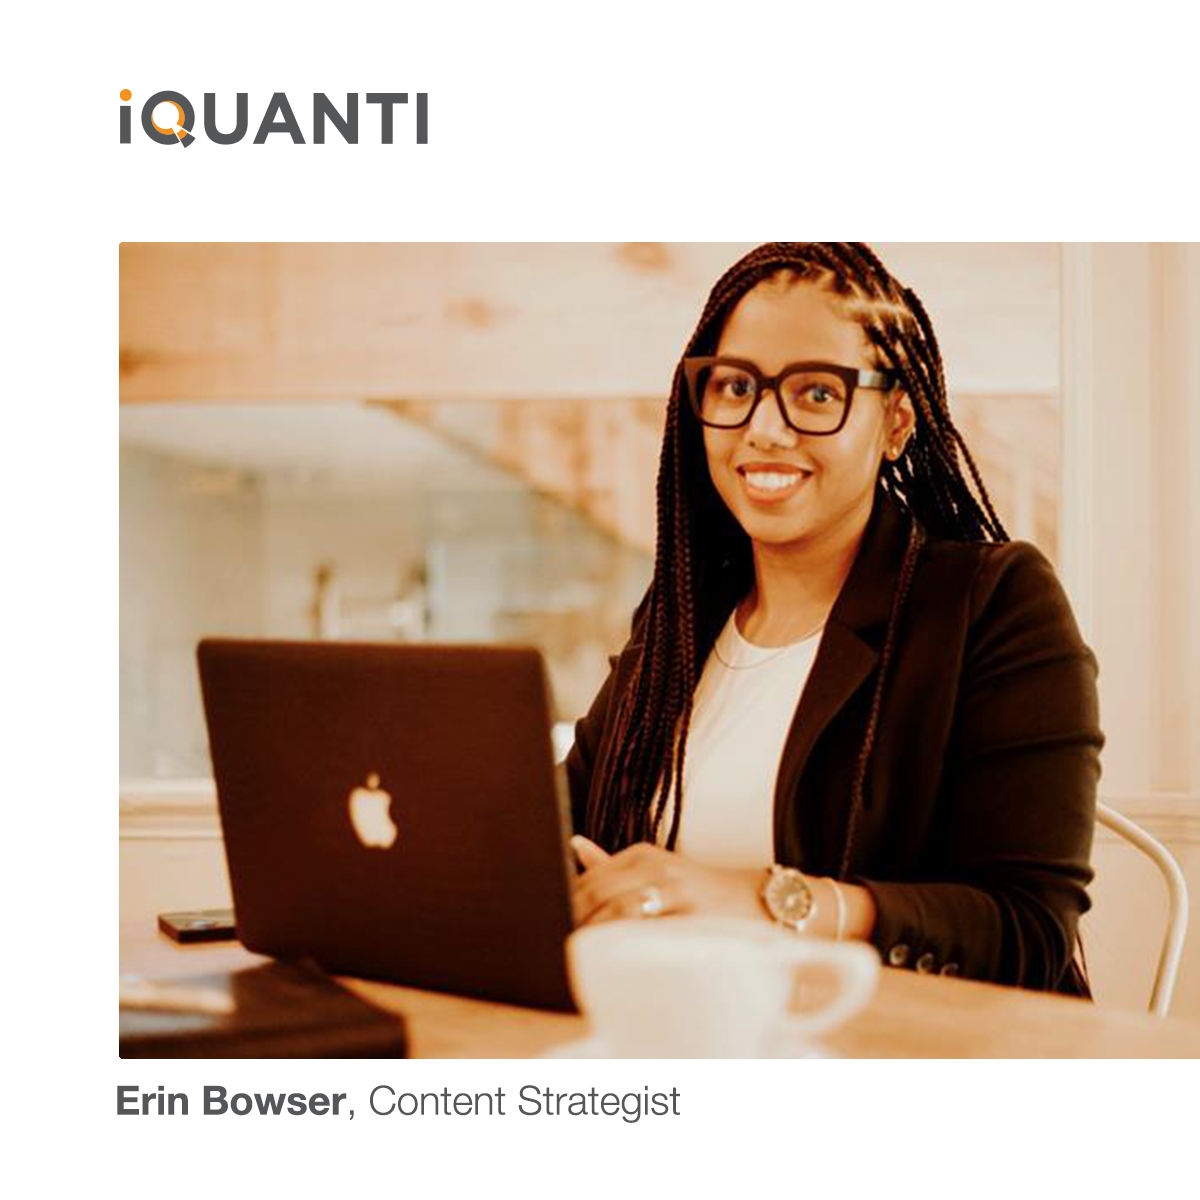 Meet Erin Bowser, From Content Writer to Content Strategist at iQuanti. Passionate about personal finance & life insurance. Embracing the human touch in content creation to deliver success for our clients.

#ContentStrategy #iQuantiSuccess #PassionForWriting #EmployeeSpotlight